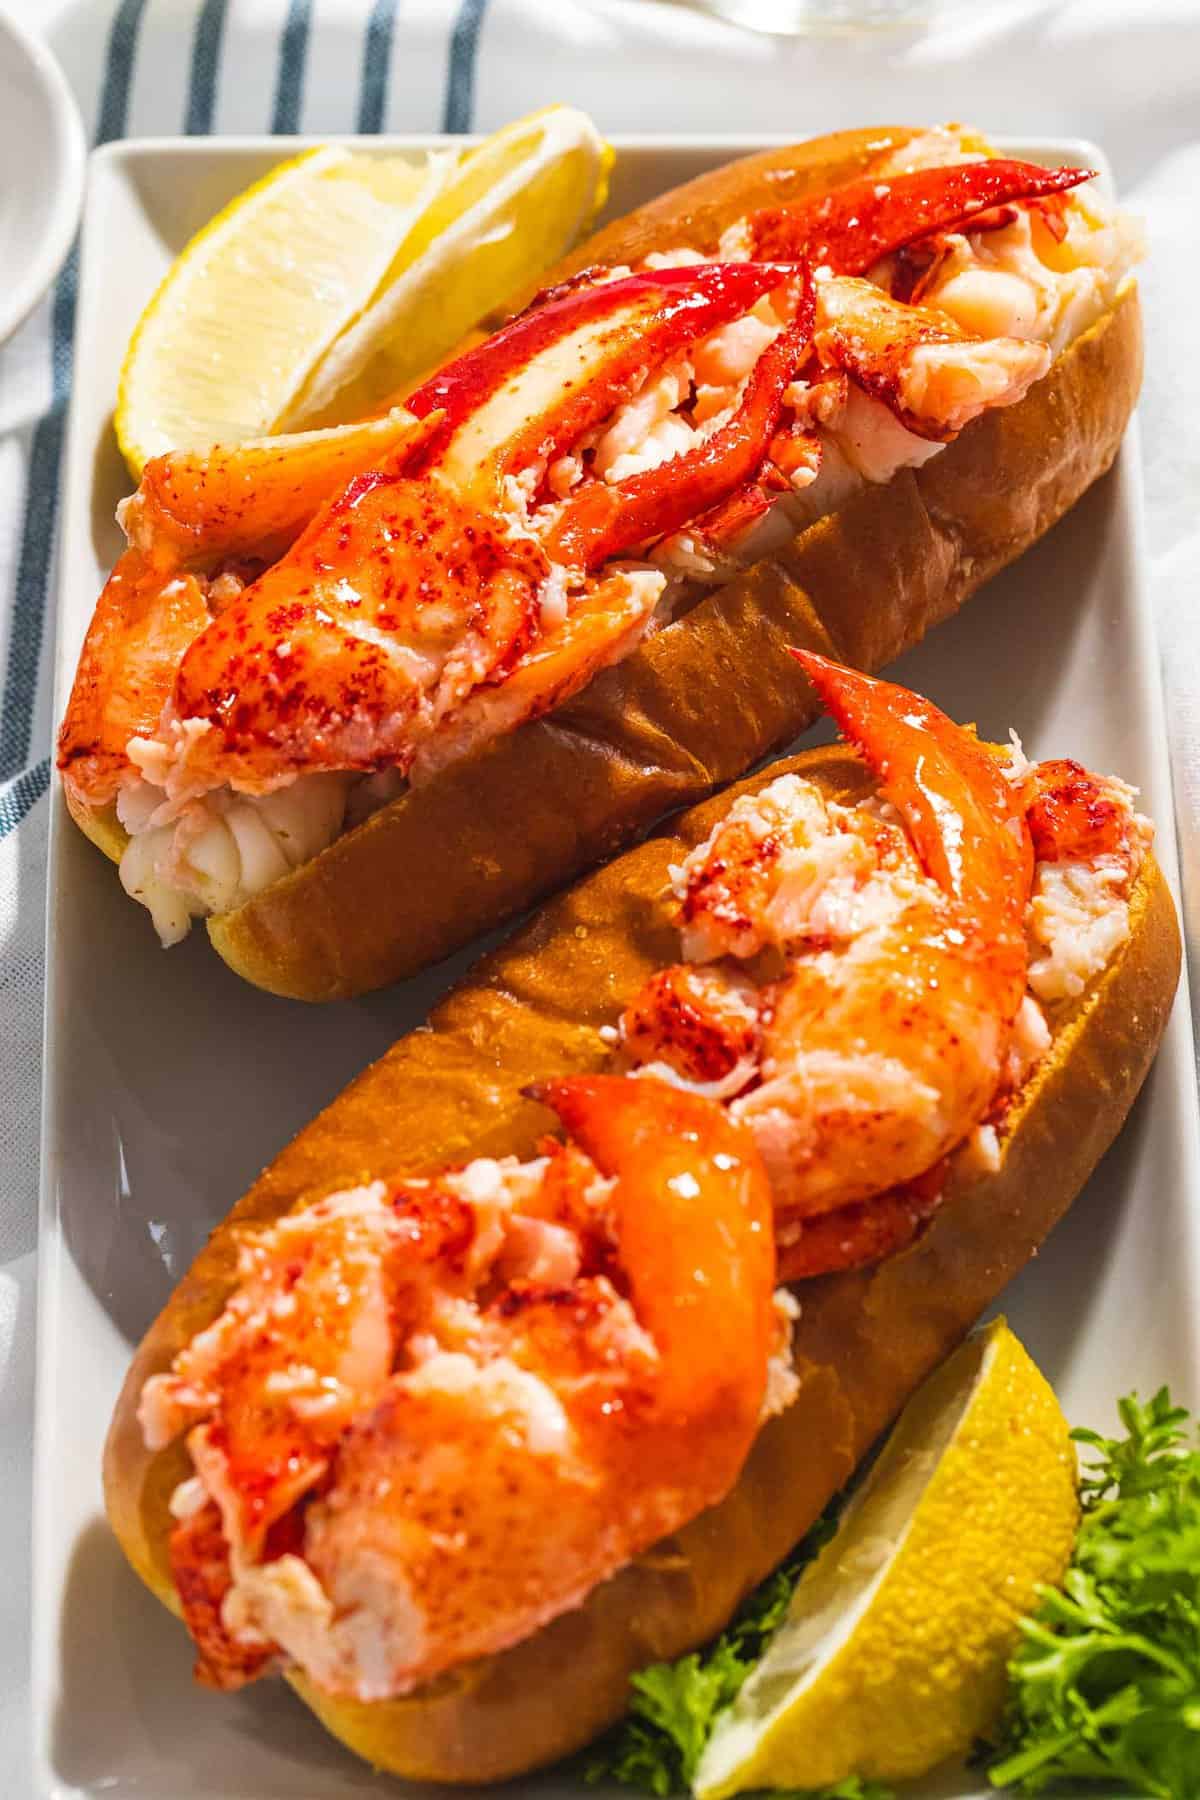 Connecticut lobster roll with claw meat on a hot dog bun.